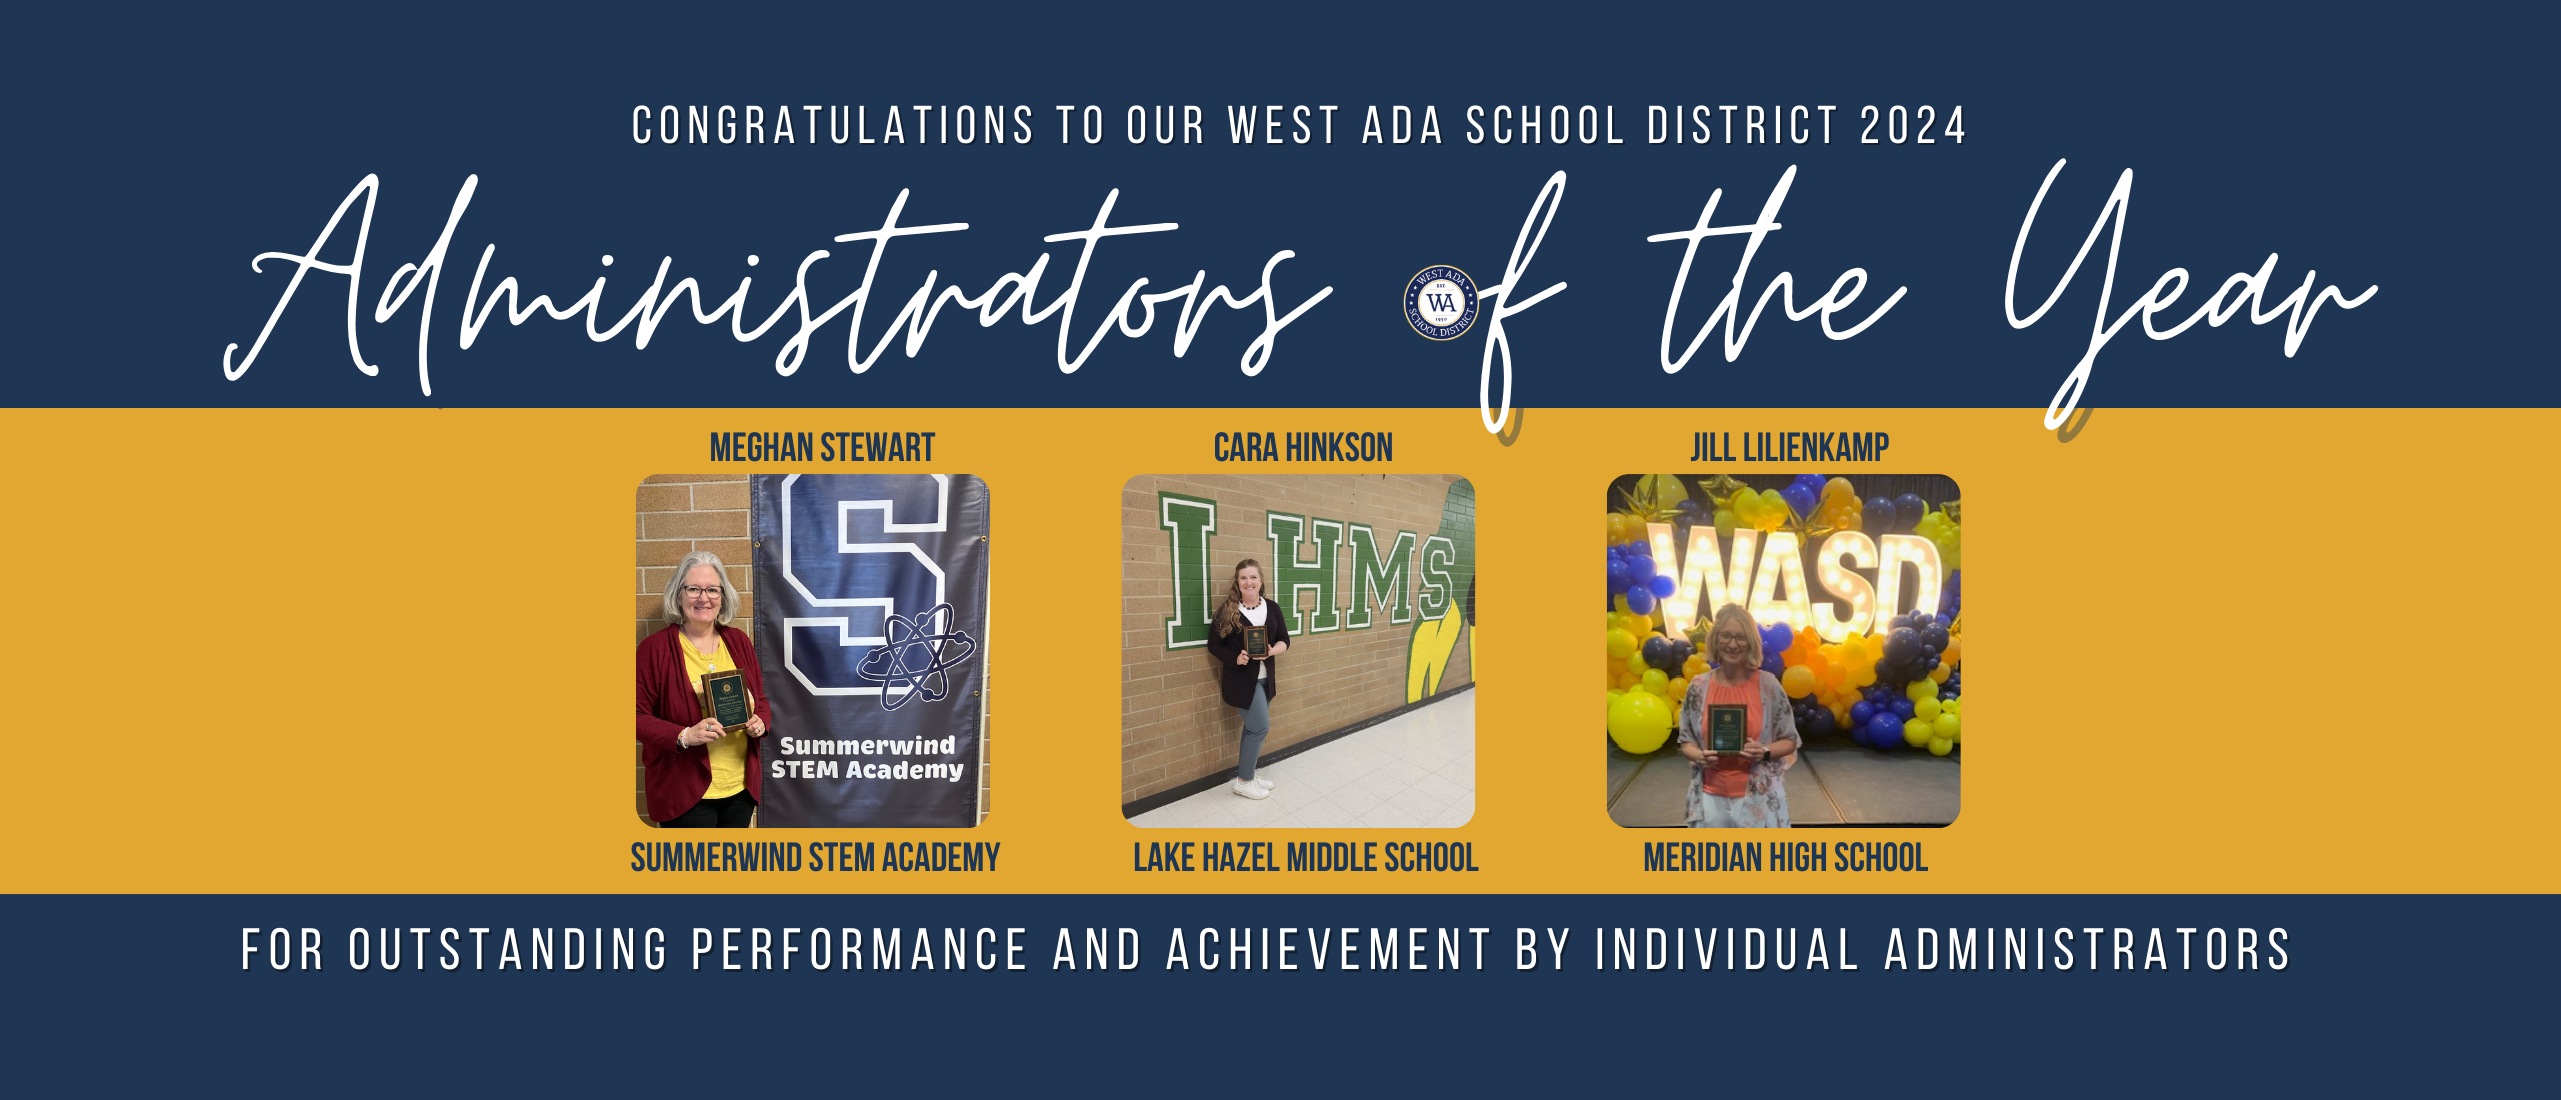 congratulations to west ada school district 2024 administrators of the year - four outstanding performance and achievement by individual adminsitrators